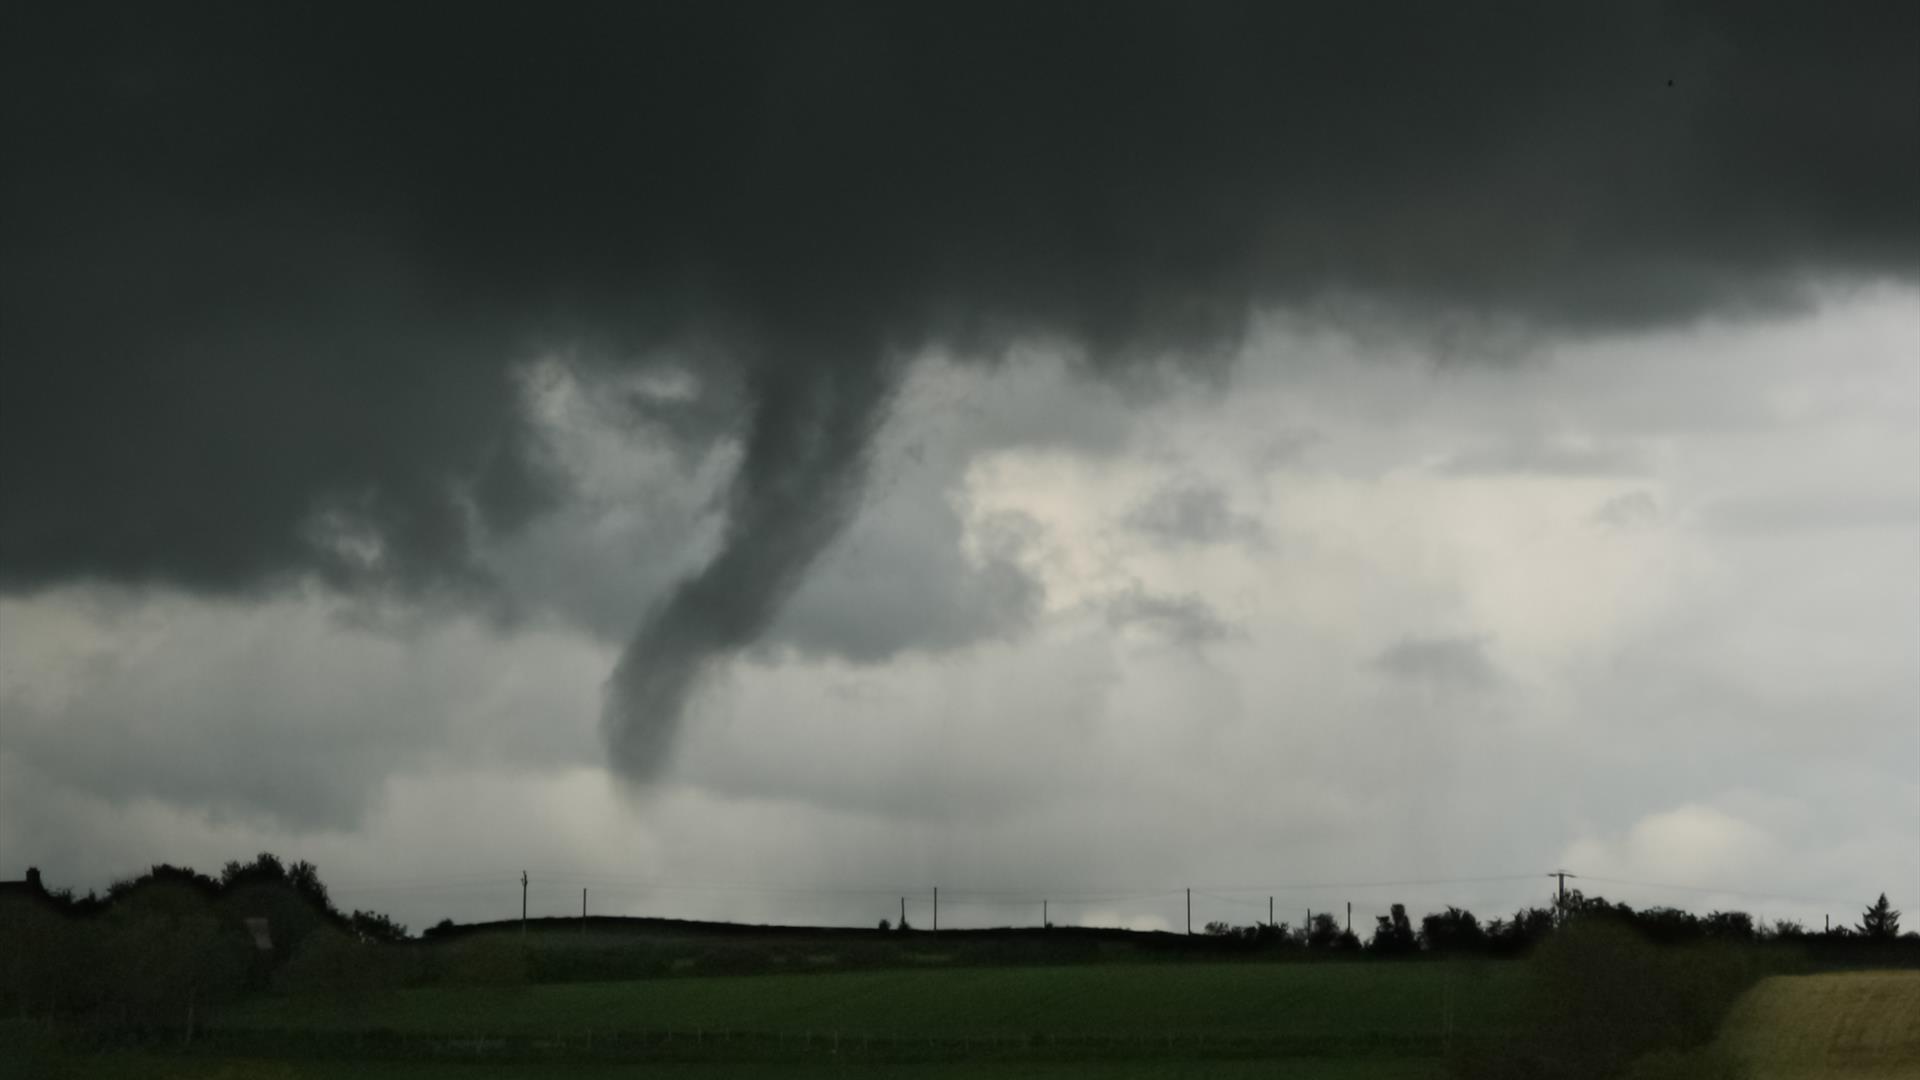 A funnel cloud in a stormy grey sky